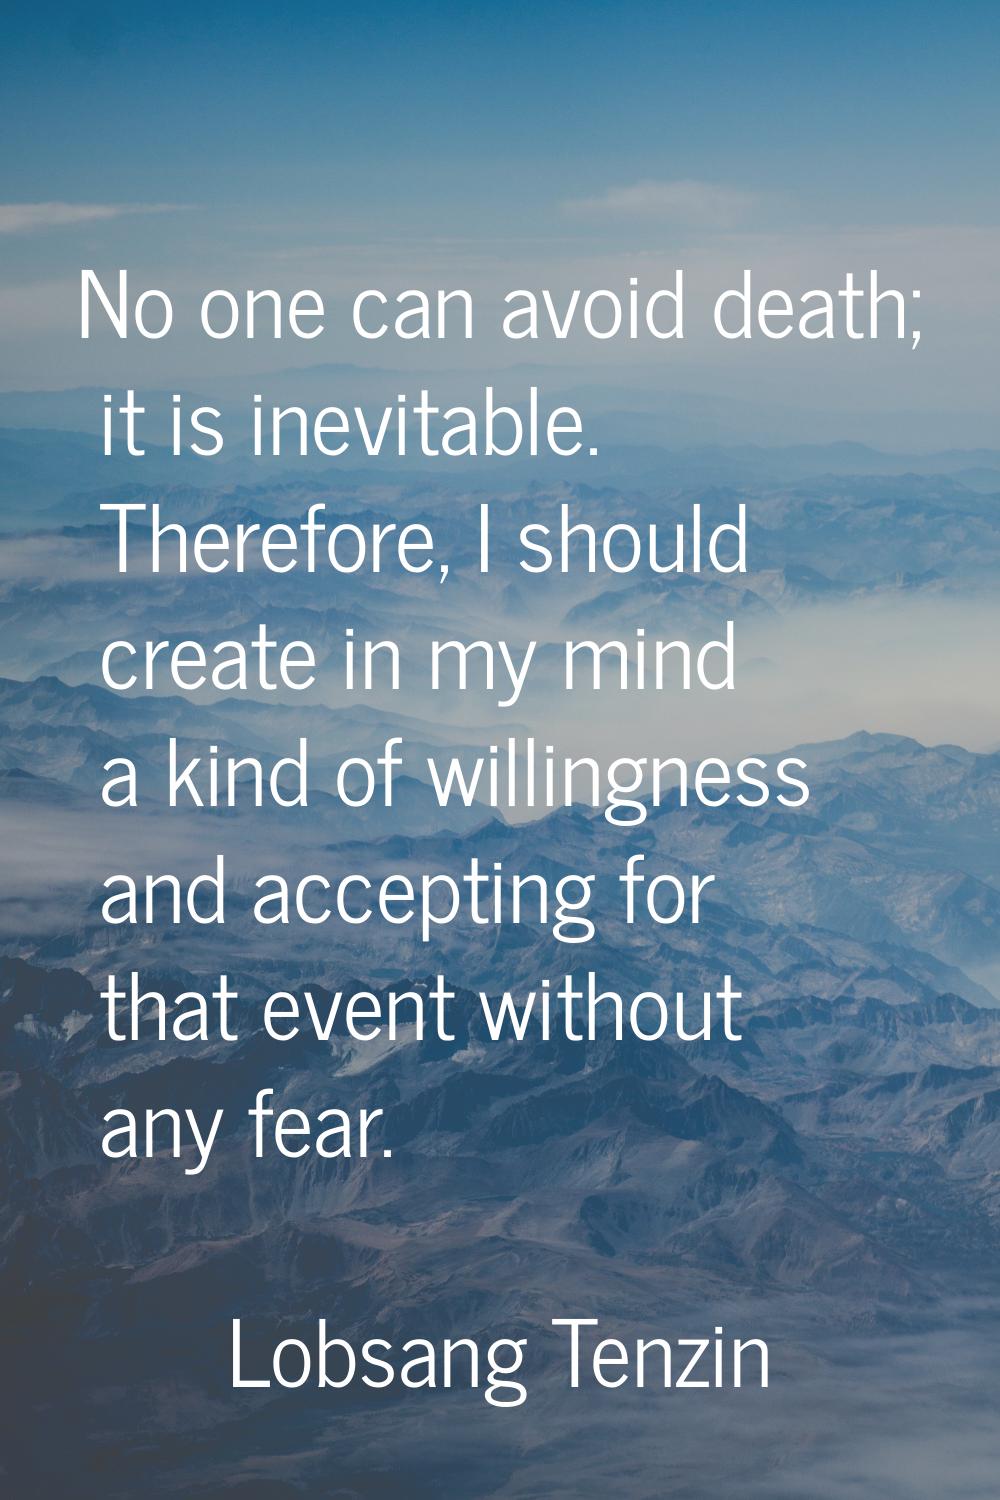 No one can avoid death; it is inevitable. Therefore, I should create in my mind a kind of willingne